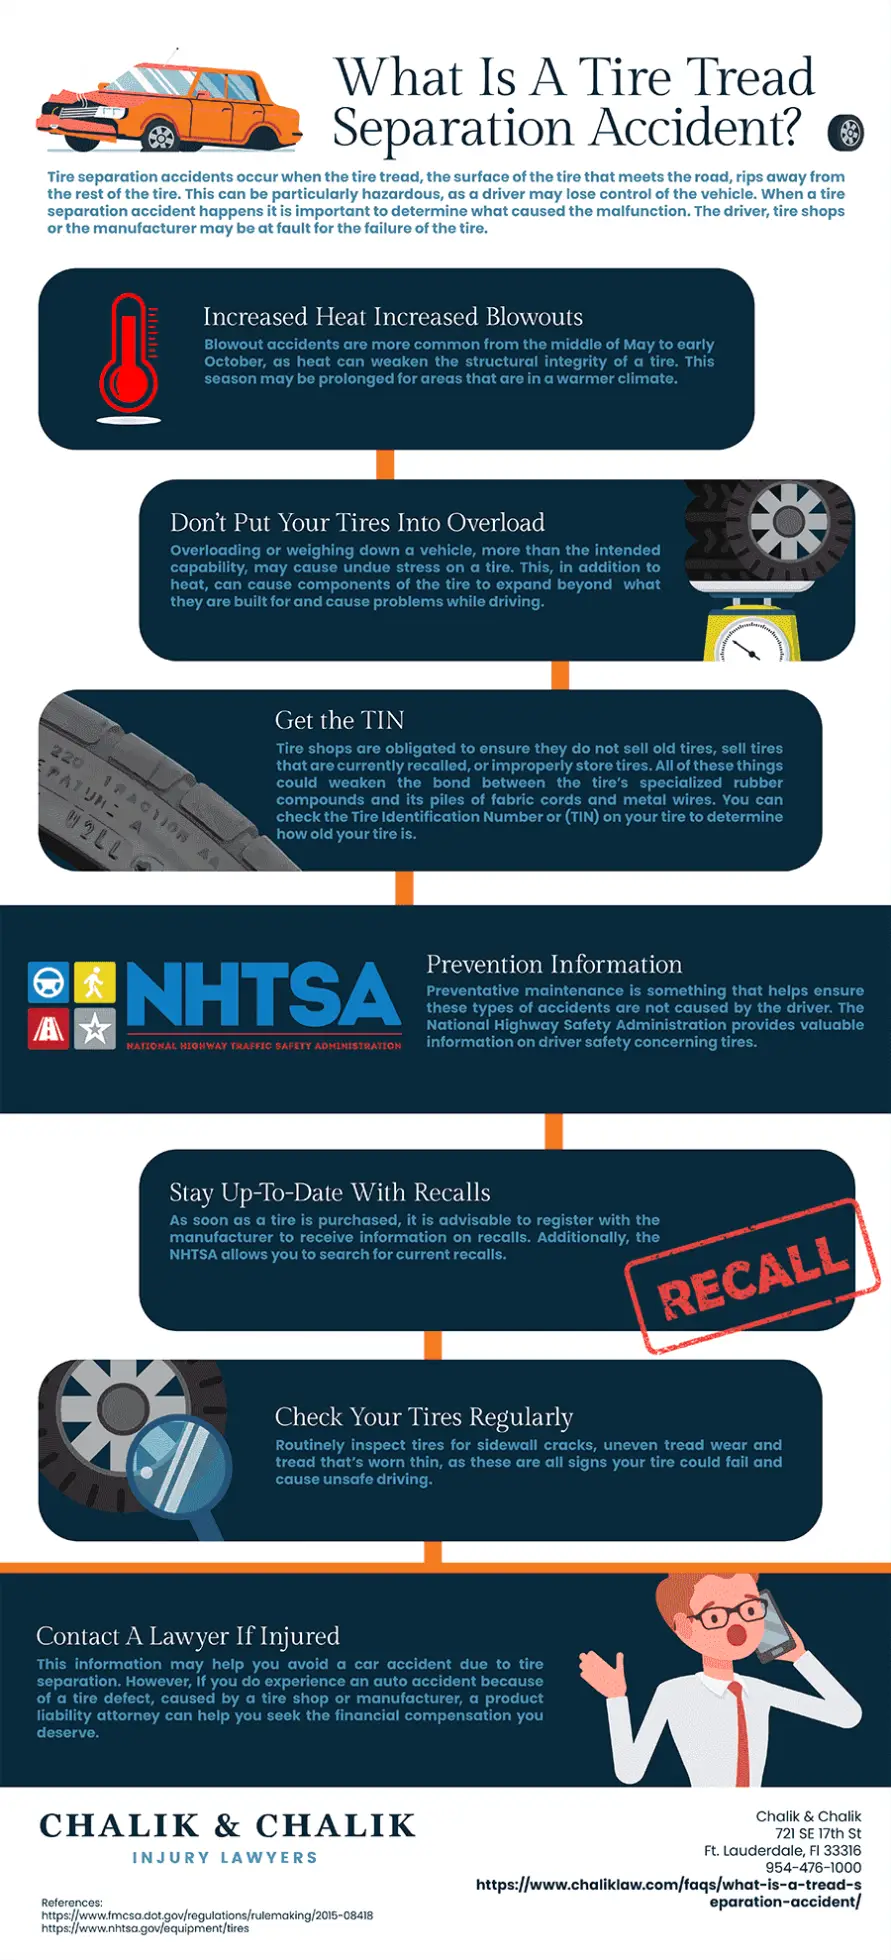 Infographic: What Is A Tread Separation Accident?